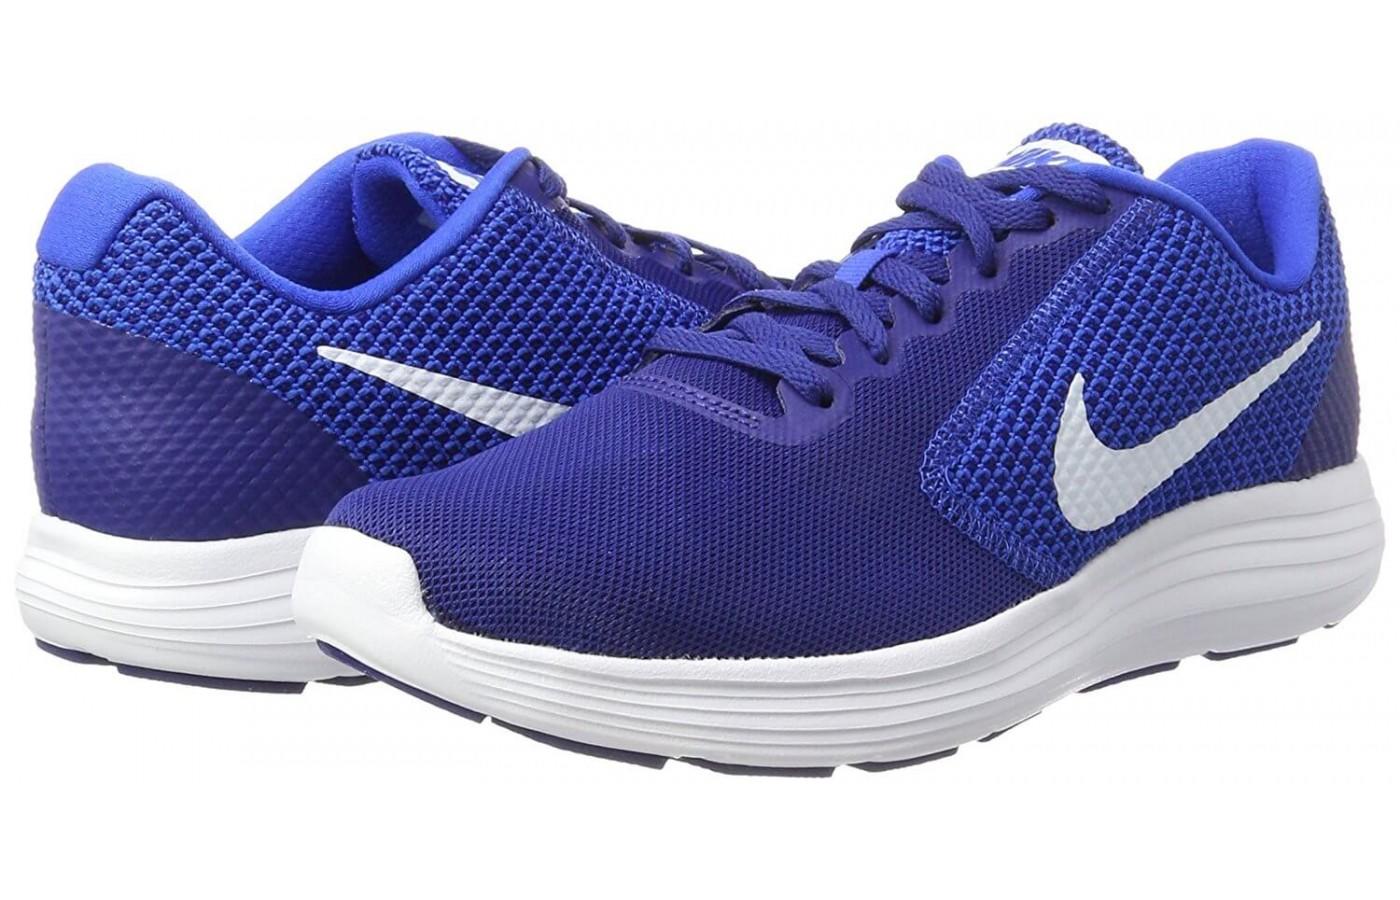 The Nike Revolution 3 features a synthetic mesh upper